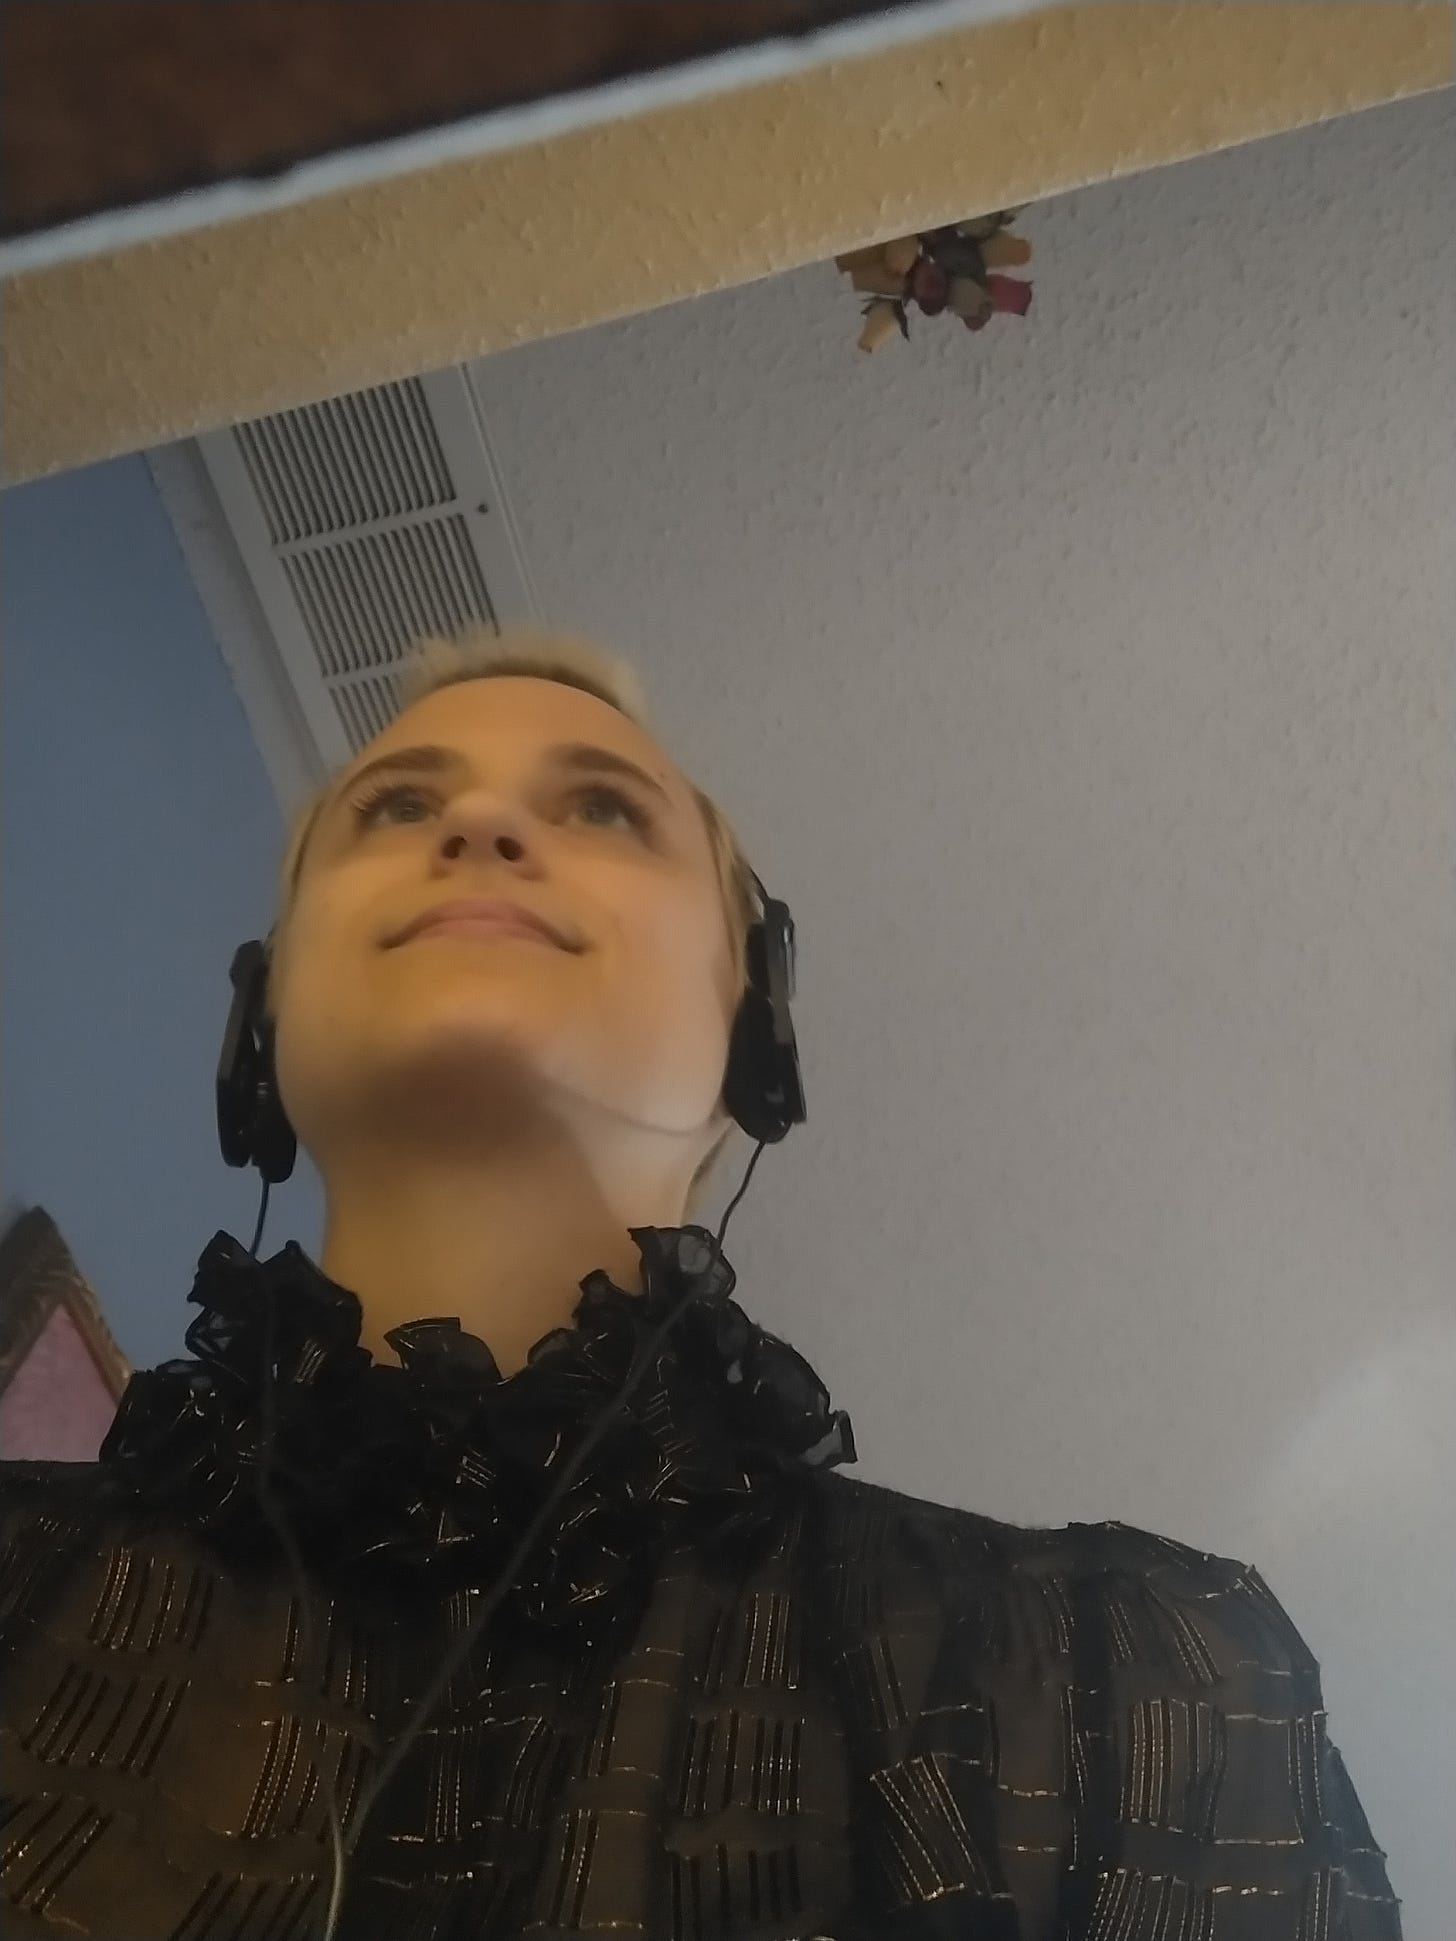 Jenna in a video call wearing headphones and a very frilly black and gold shirt.